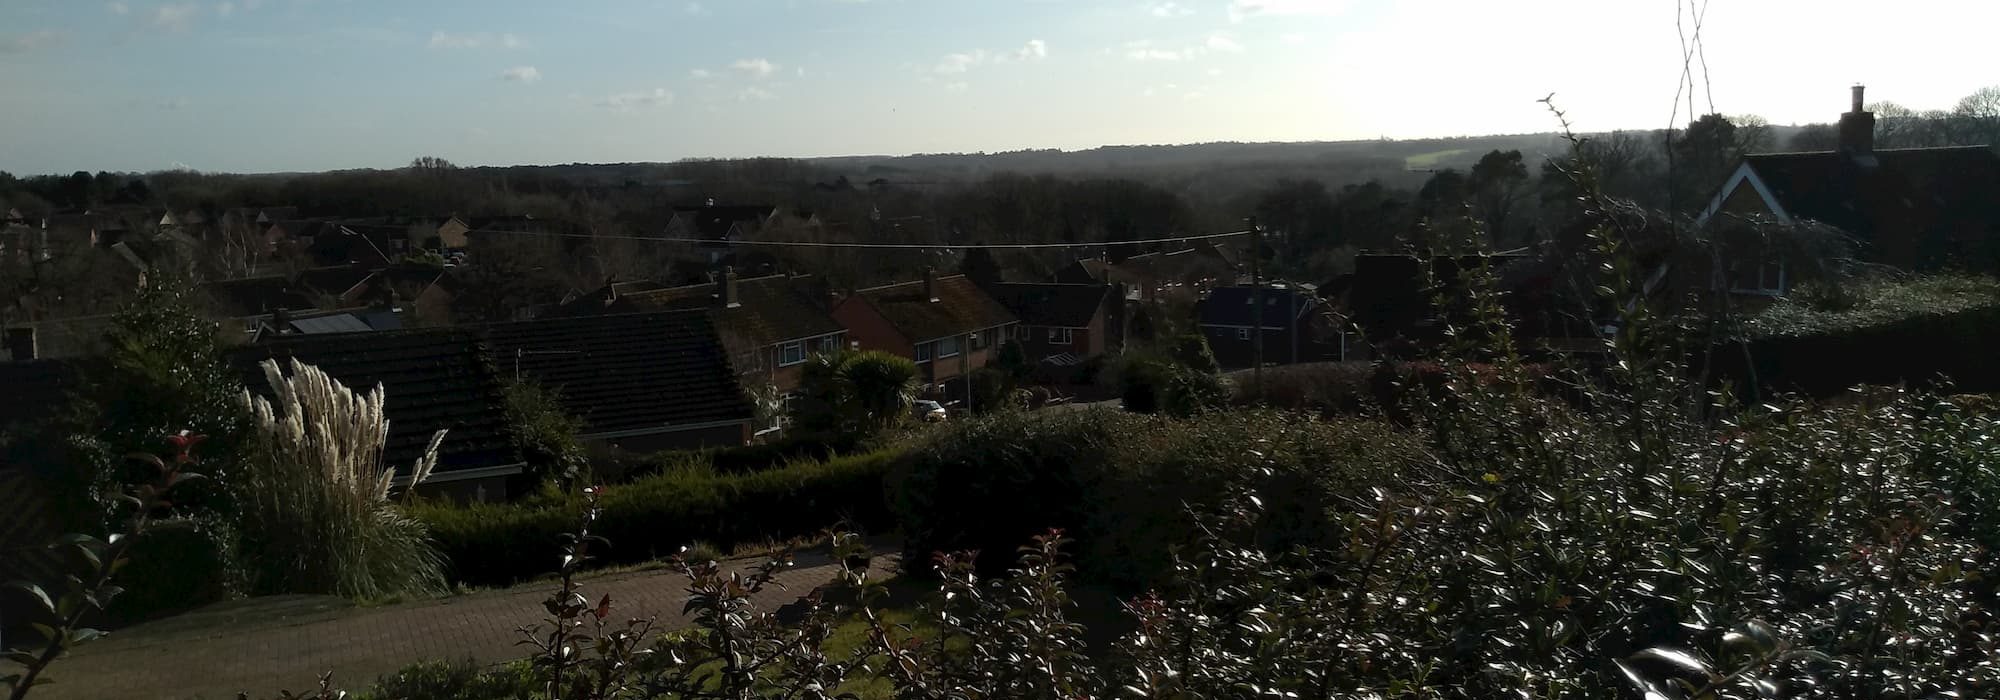 View over Thorpe St Andrew